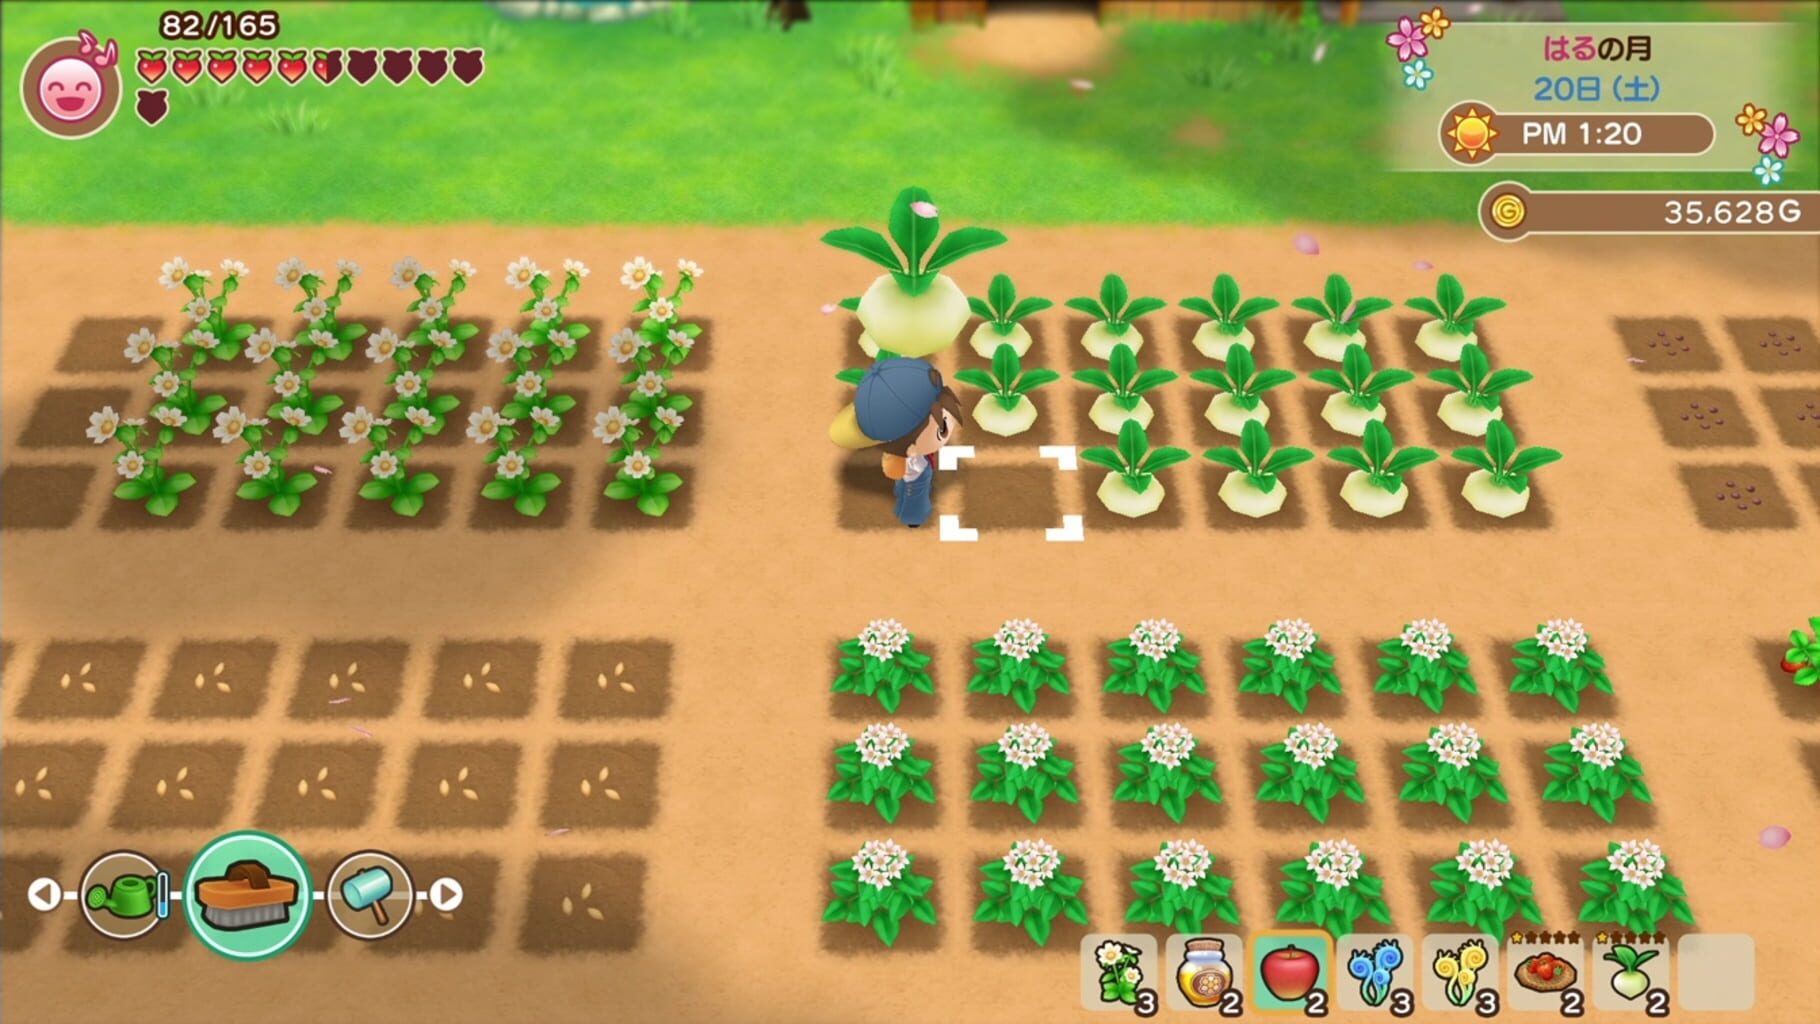 Screenshot for Story of Seasons: Friends of Mineral Town